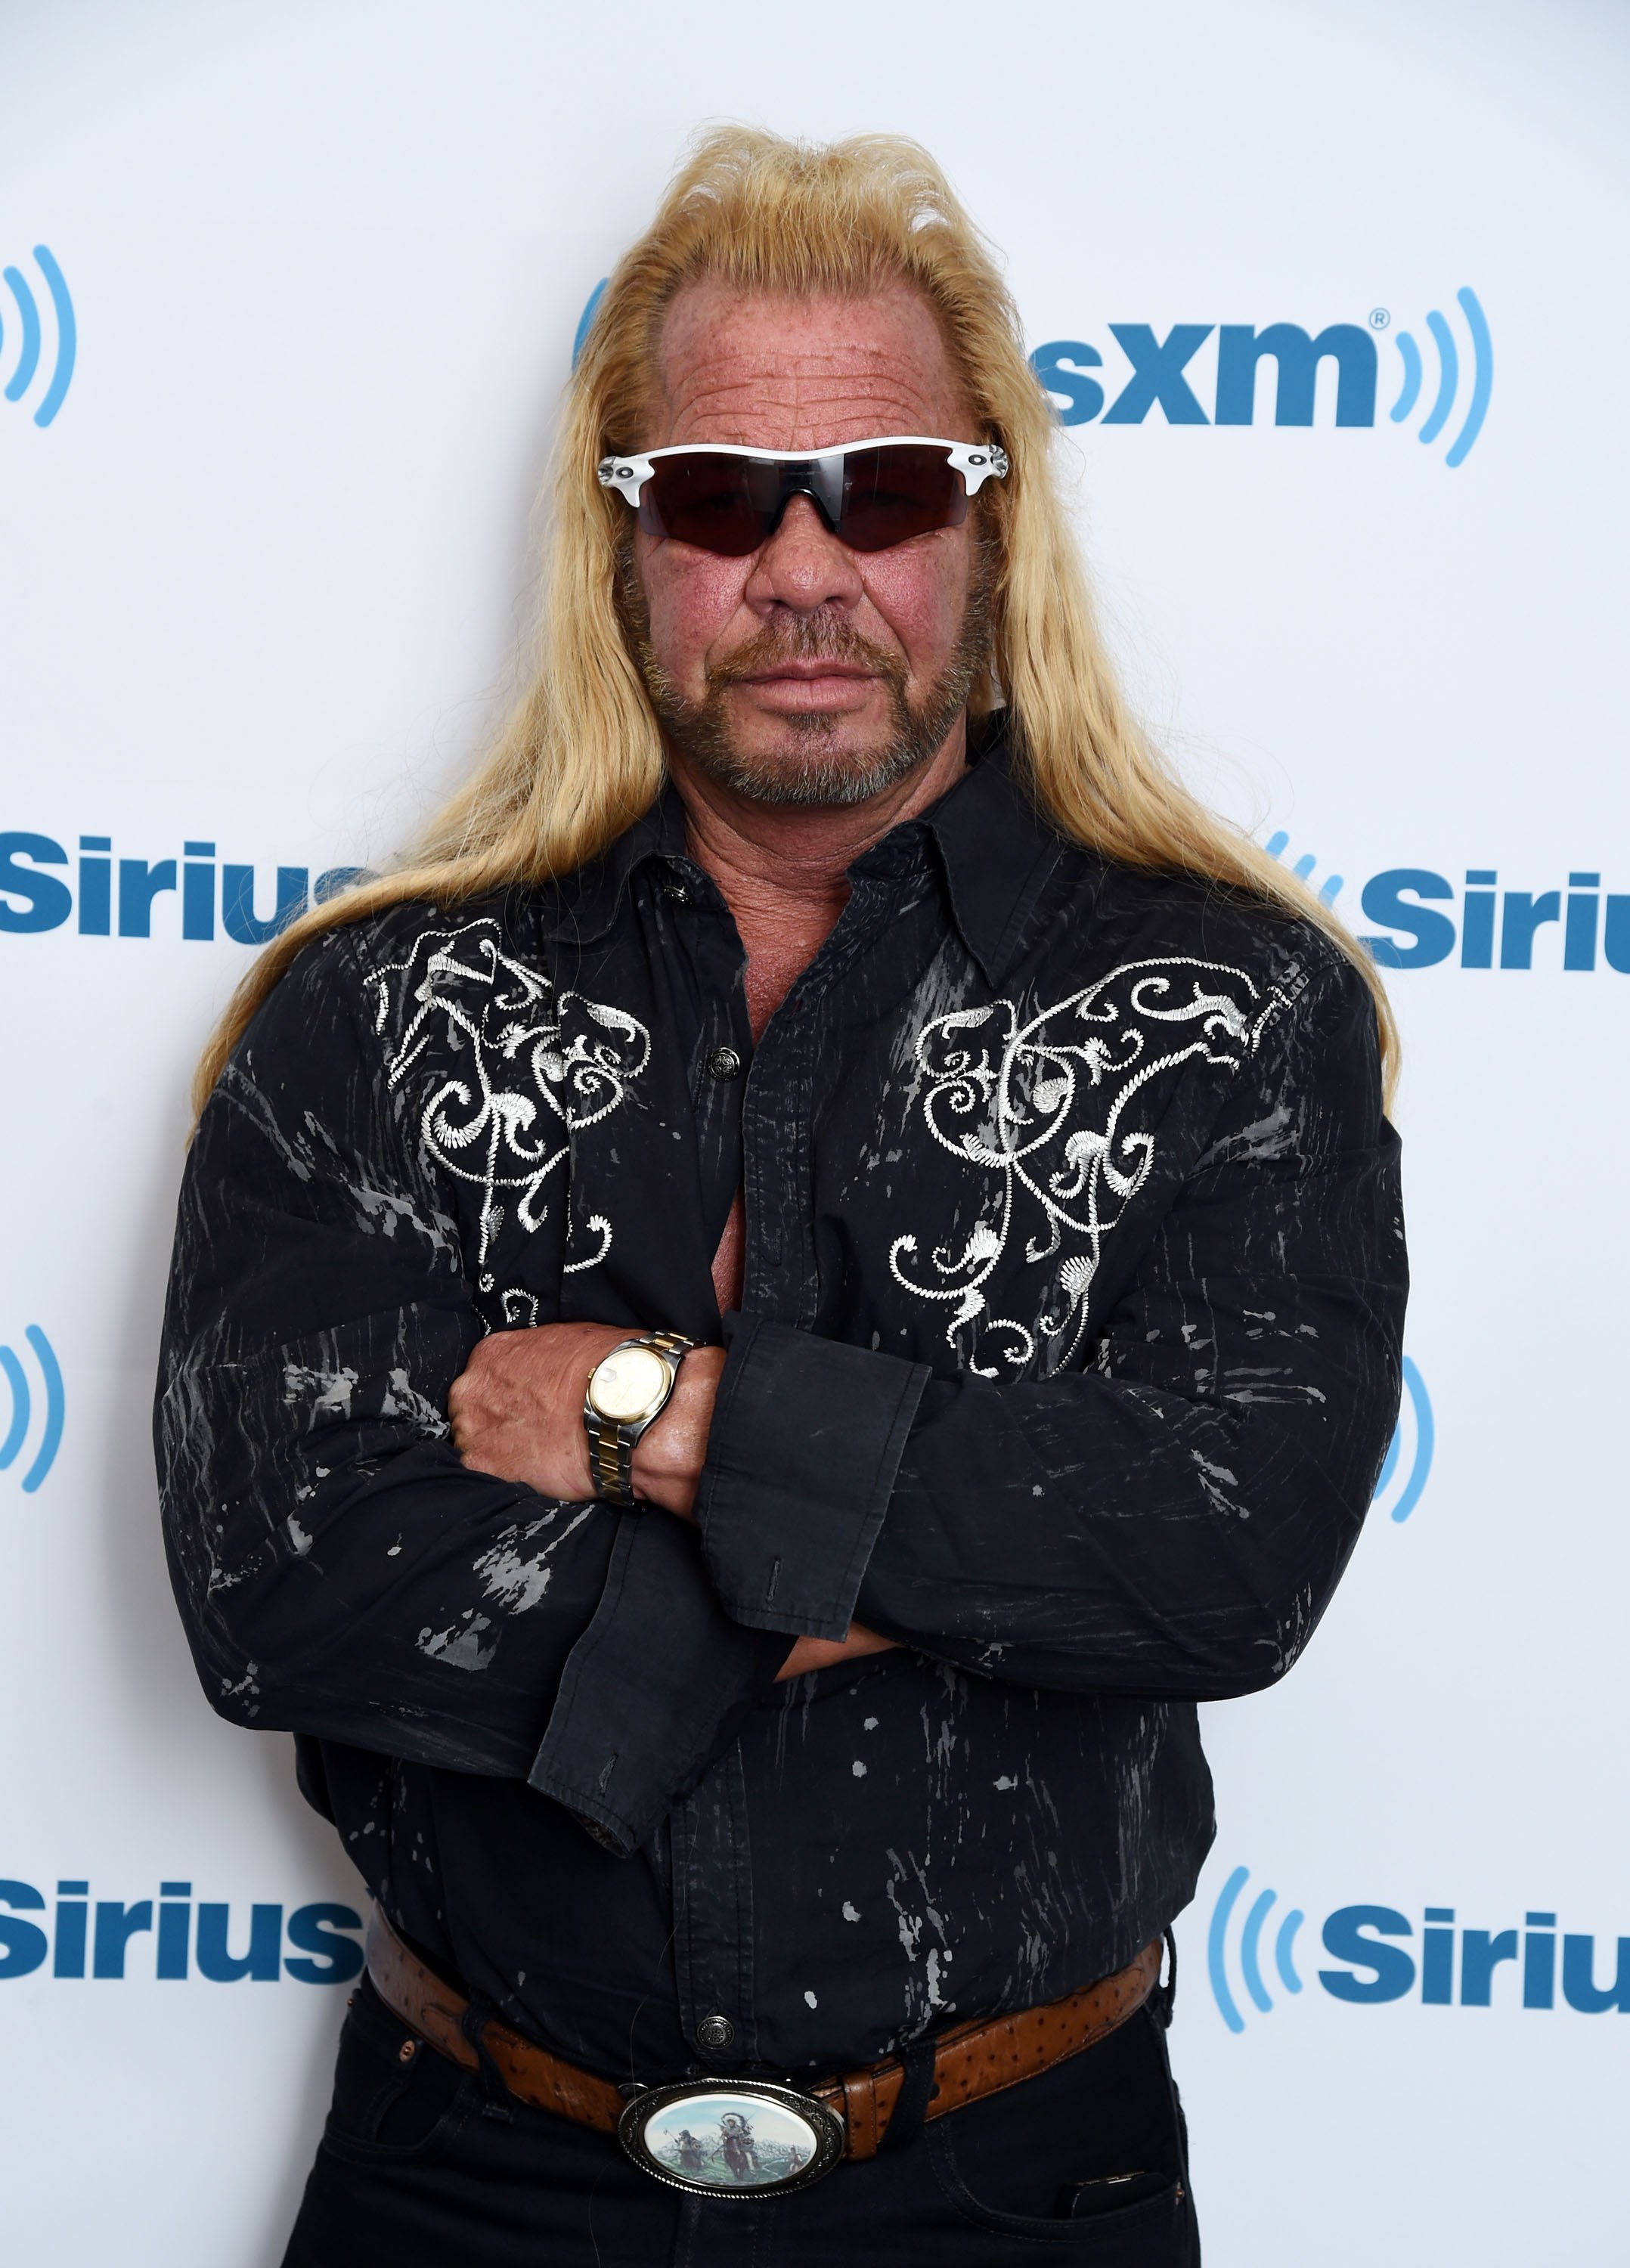 Duane Chapman visits the SiriusXM Studios on April 24, 2015 in New York City | Photo: Getty Images